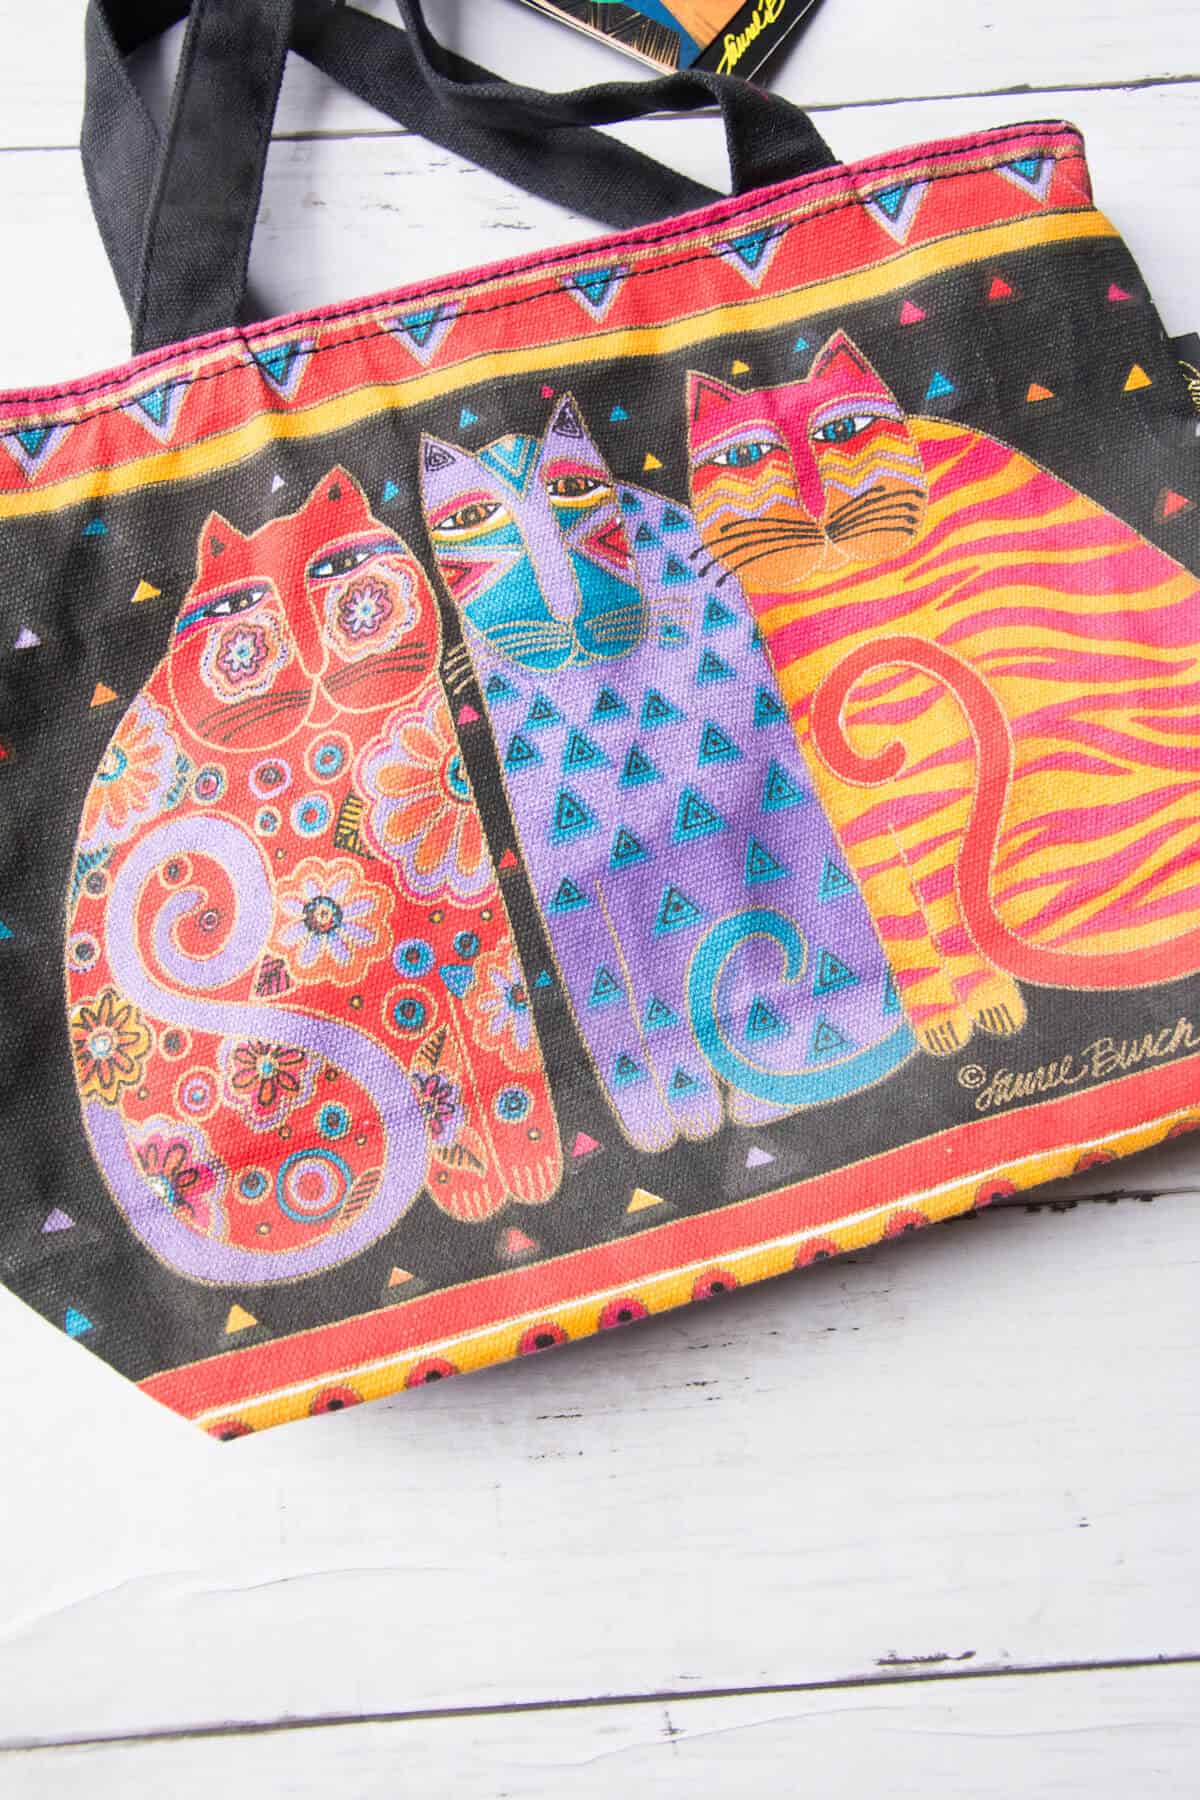 bag with colorful and patterned cats on it done by Laurel Burch.